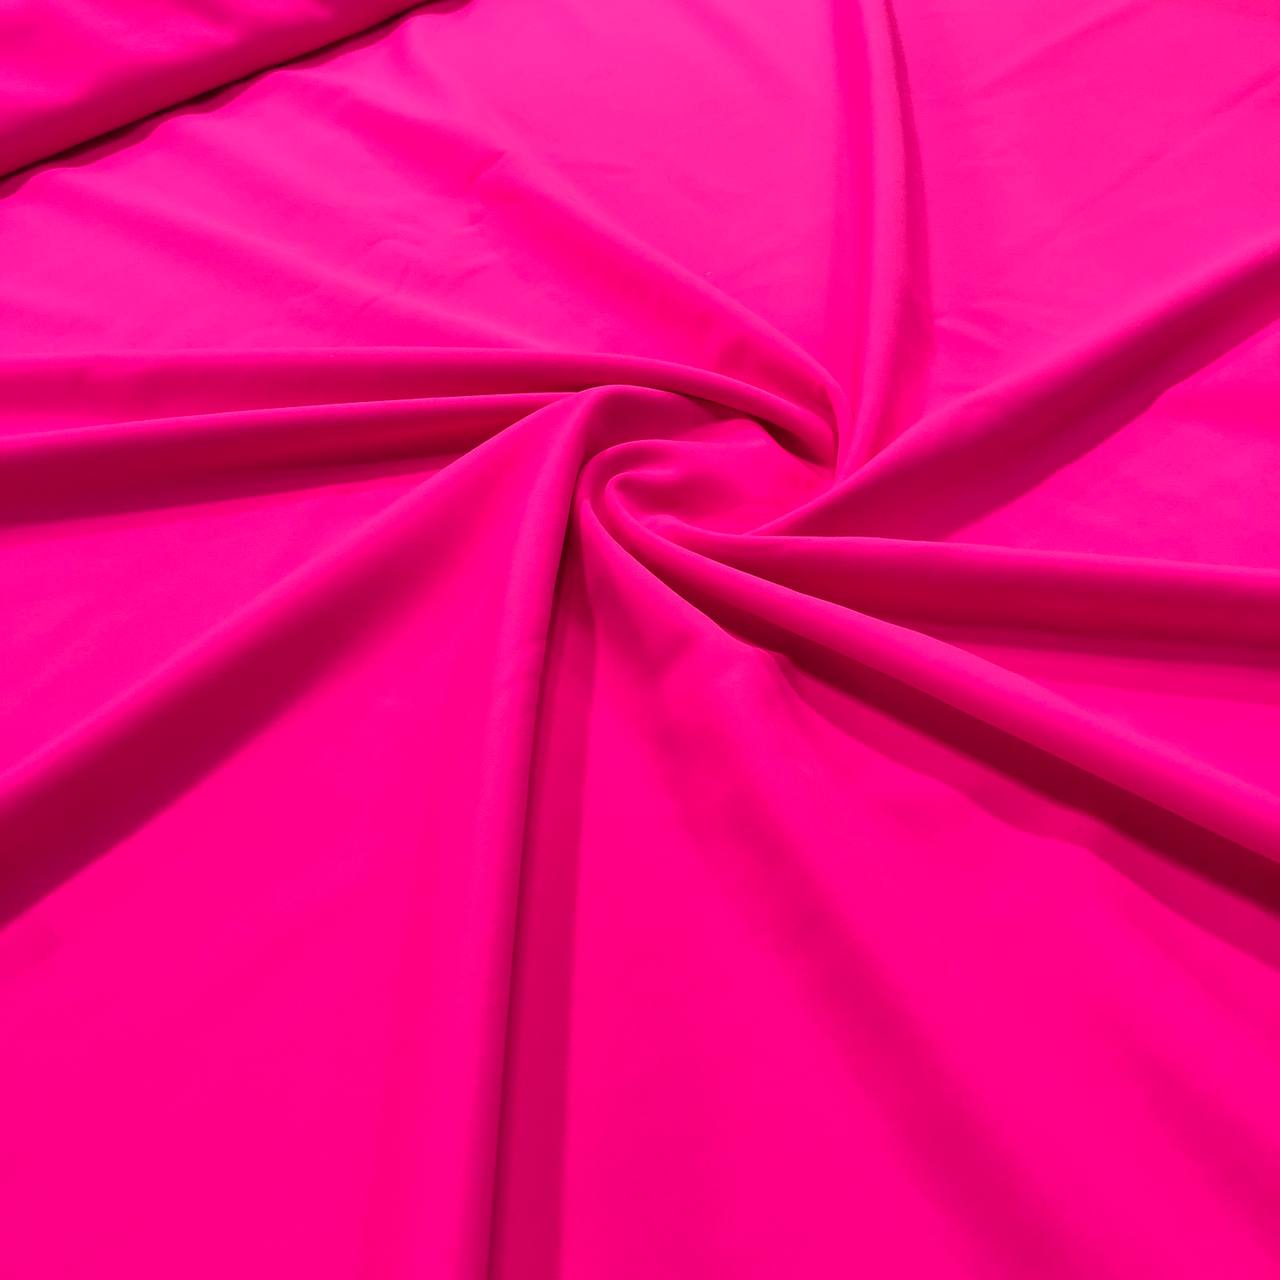 Premium Solid Color Neon Hot Pink Waterproof Nylon Lycra Spandex Fabric 4  Way Stretch By Yard (203-2) Spandex Fabric